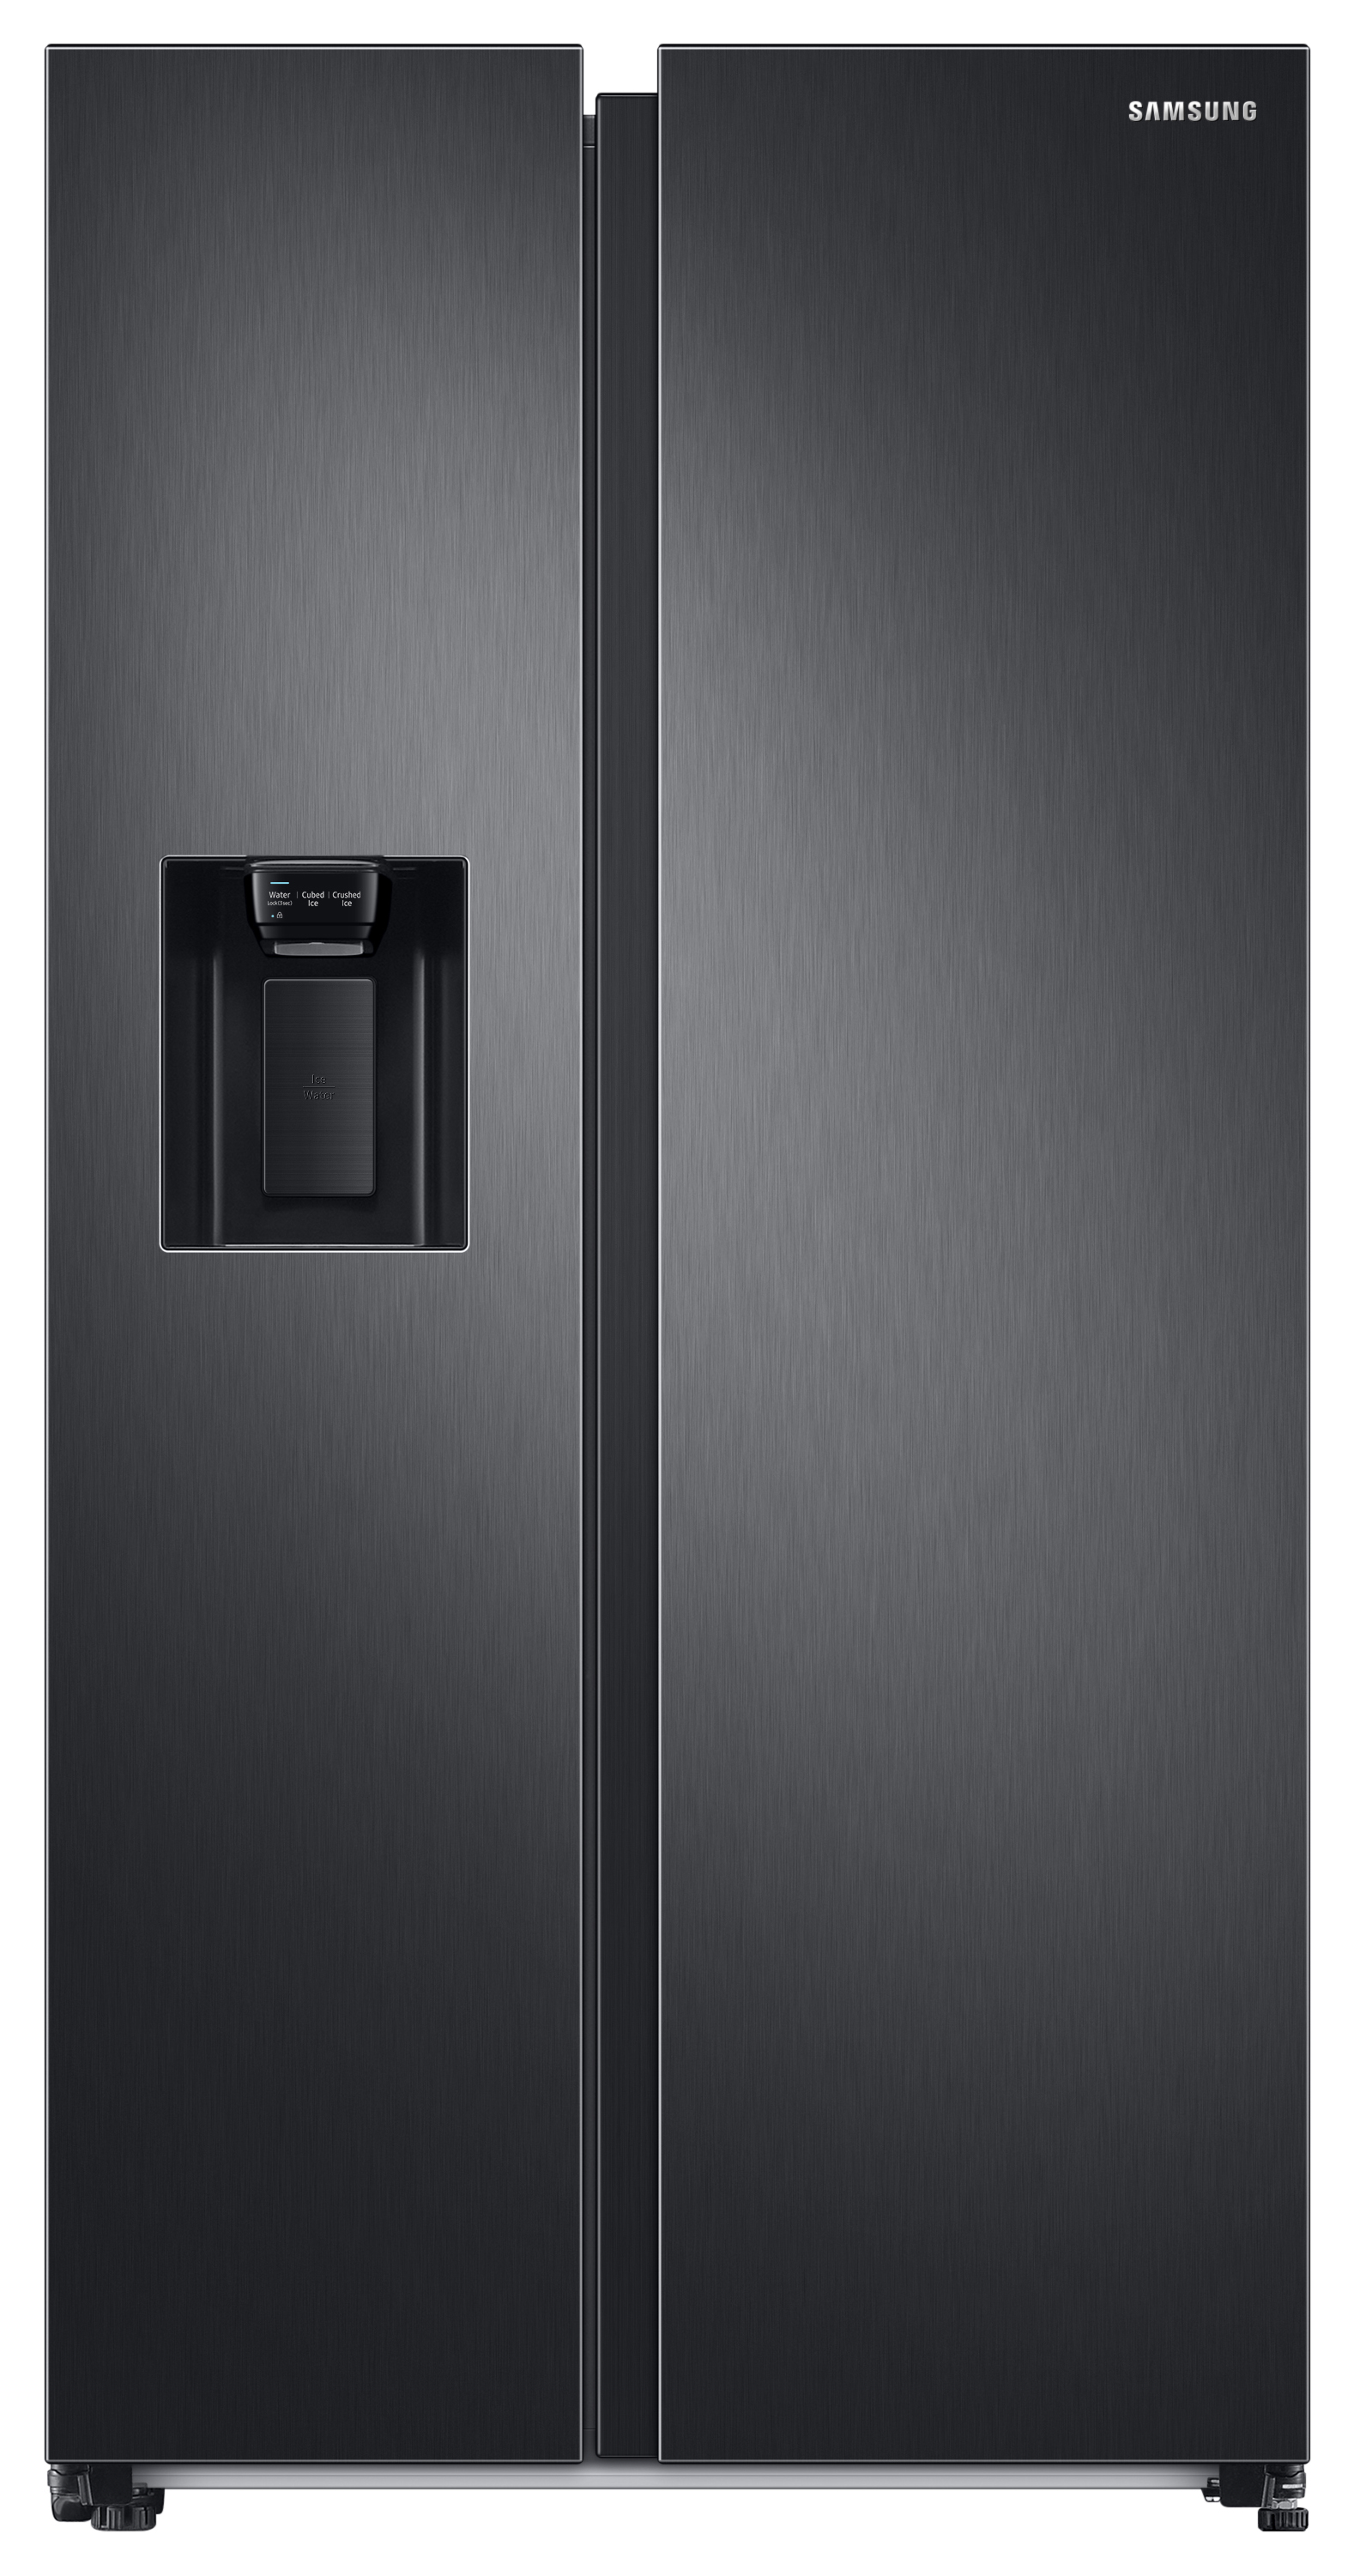 Samsung RS68A884CB1/EU Water & Ice Dispenser C-Rated American Fridge Freezer - Black Stainless Steel